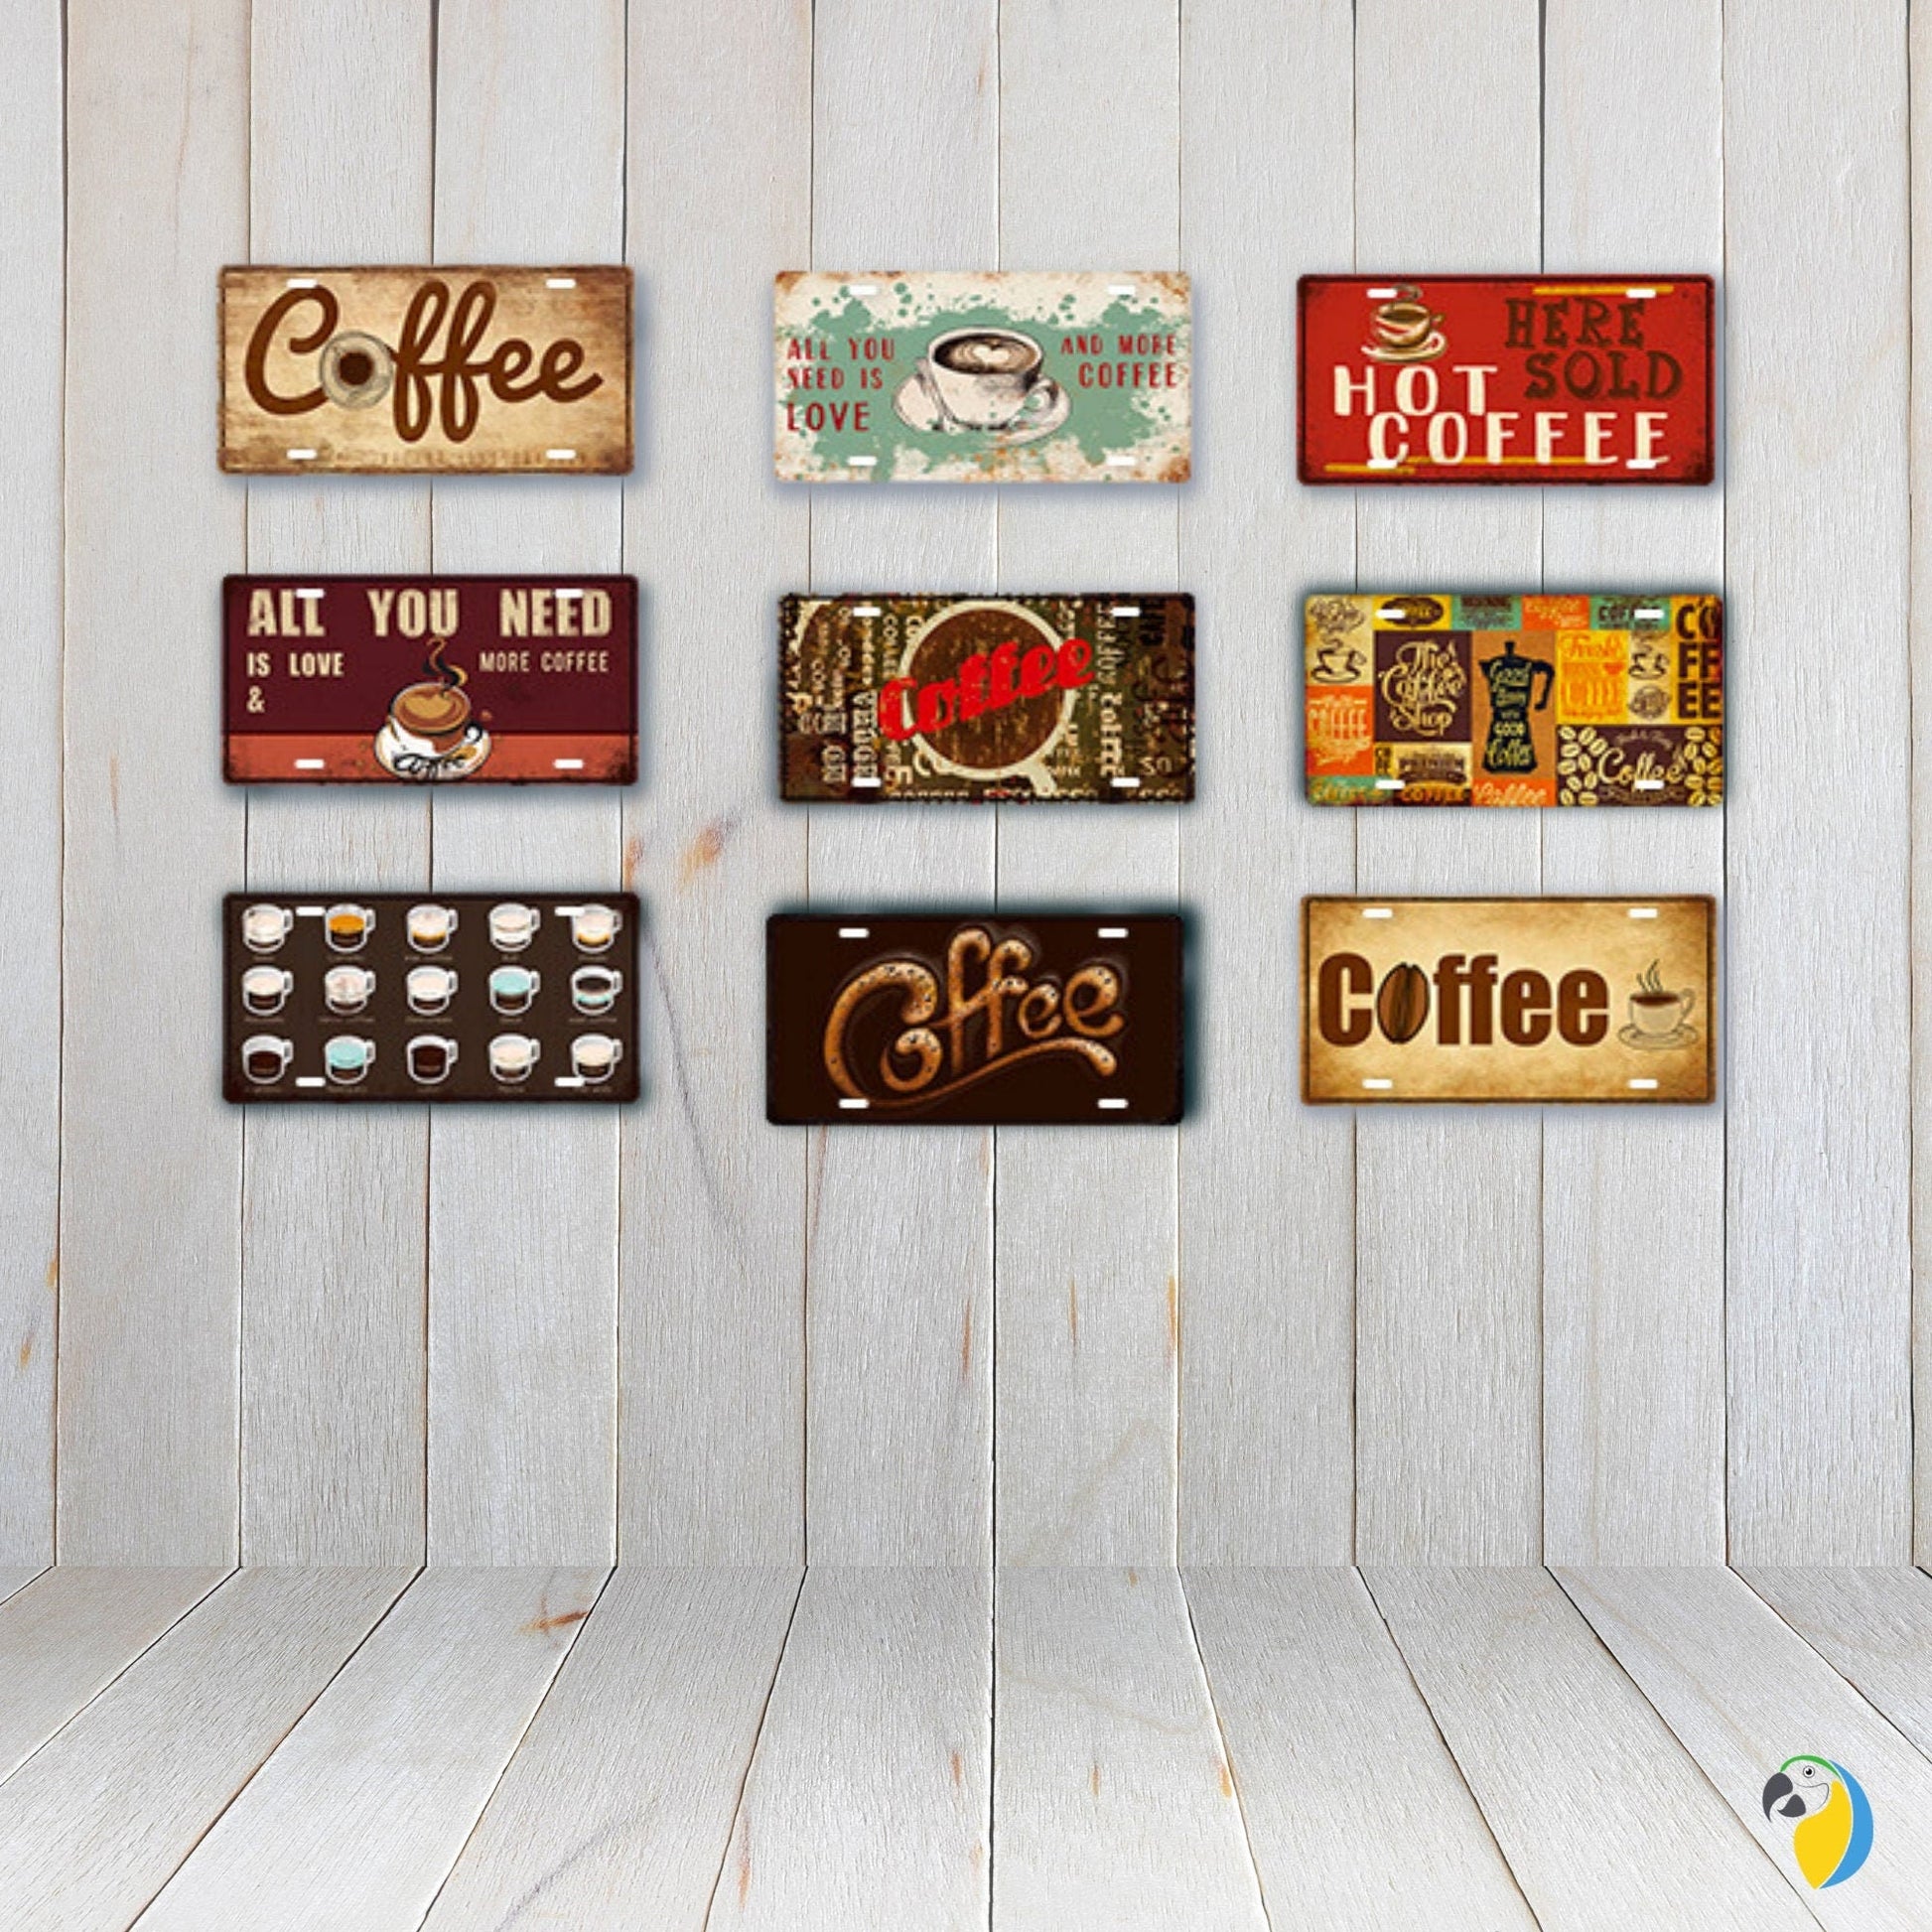 Coffee License Plate Tin Sign For Kitchen Decor | Café Decorative Metal Print | Shabby Chic Wall Hanging Plaques For Cafe Shop Cafeteria | Papagaio Studio Etsy Shop